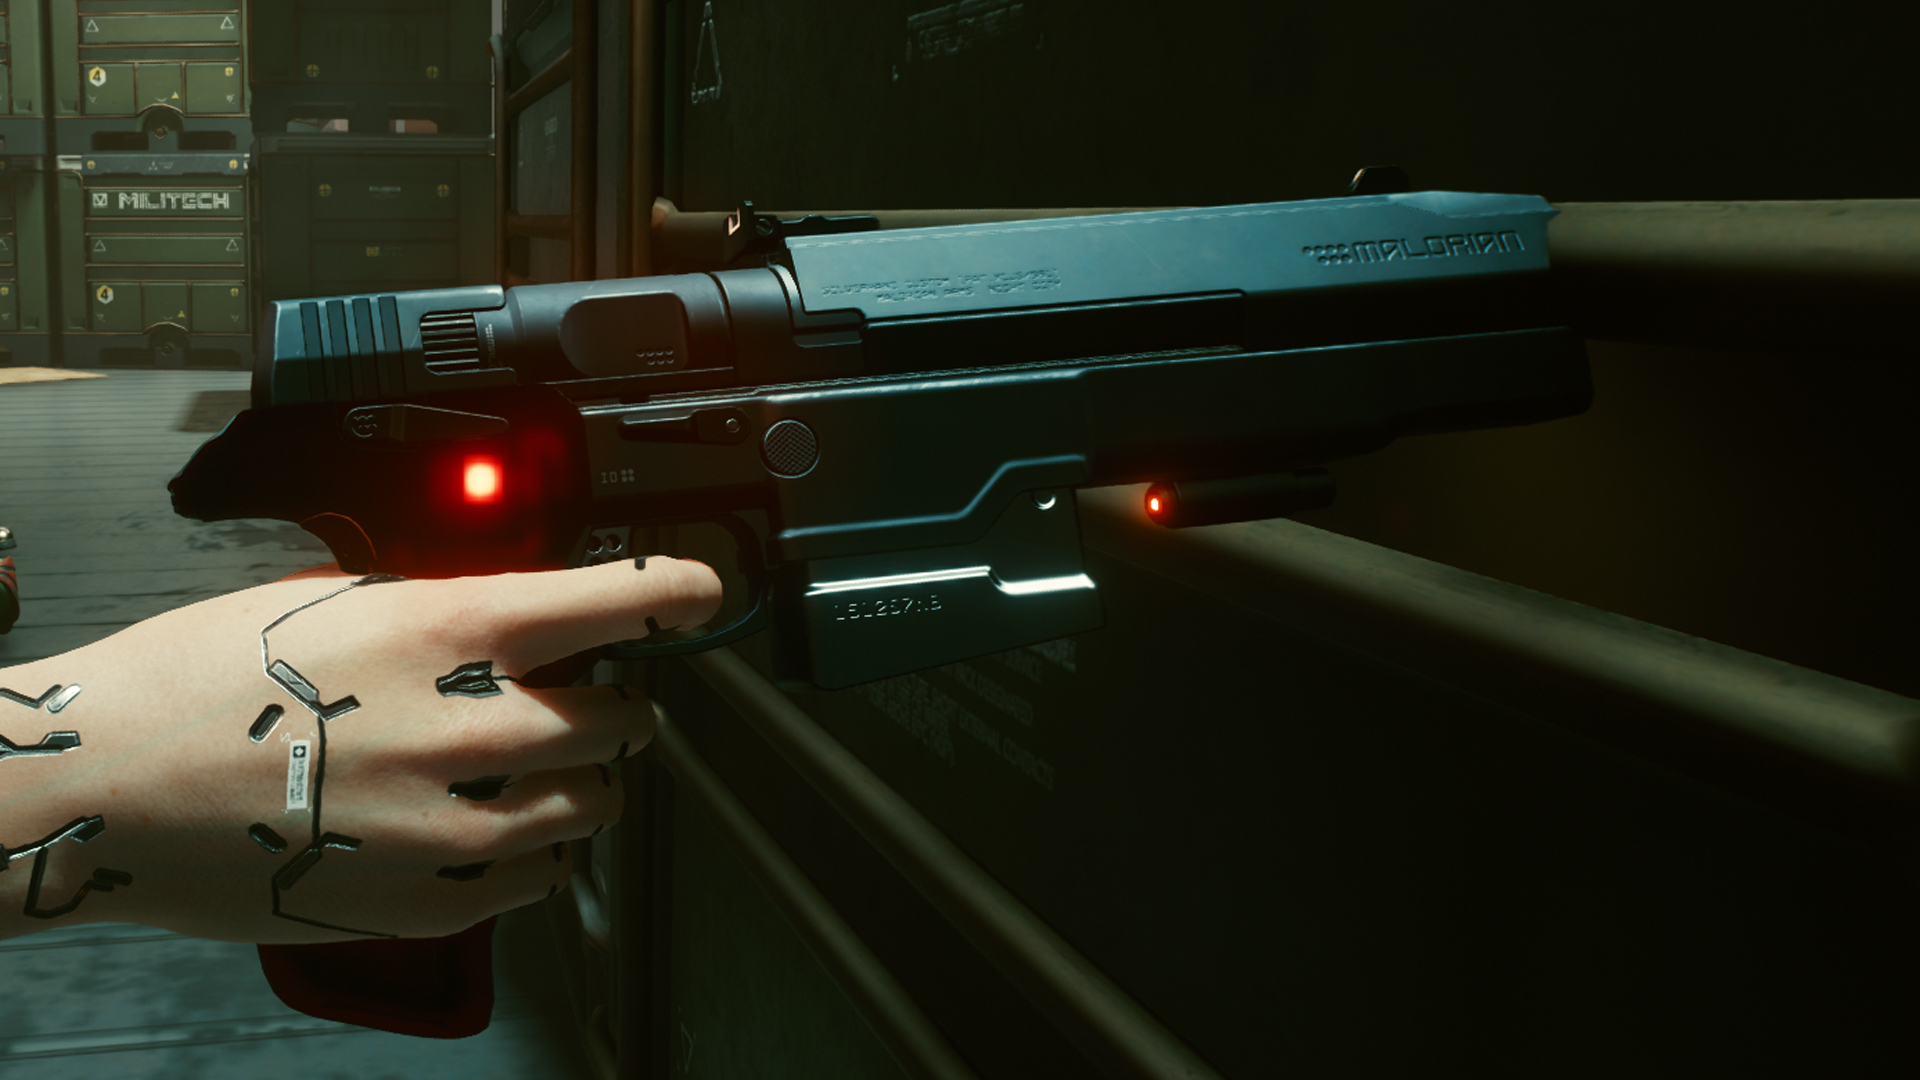 Where to find the Johnny Silverhand items in Cyberpunk 2077